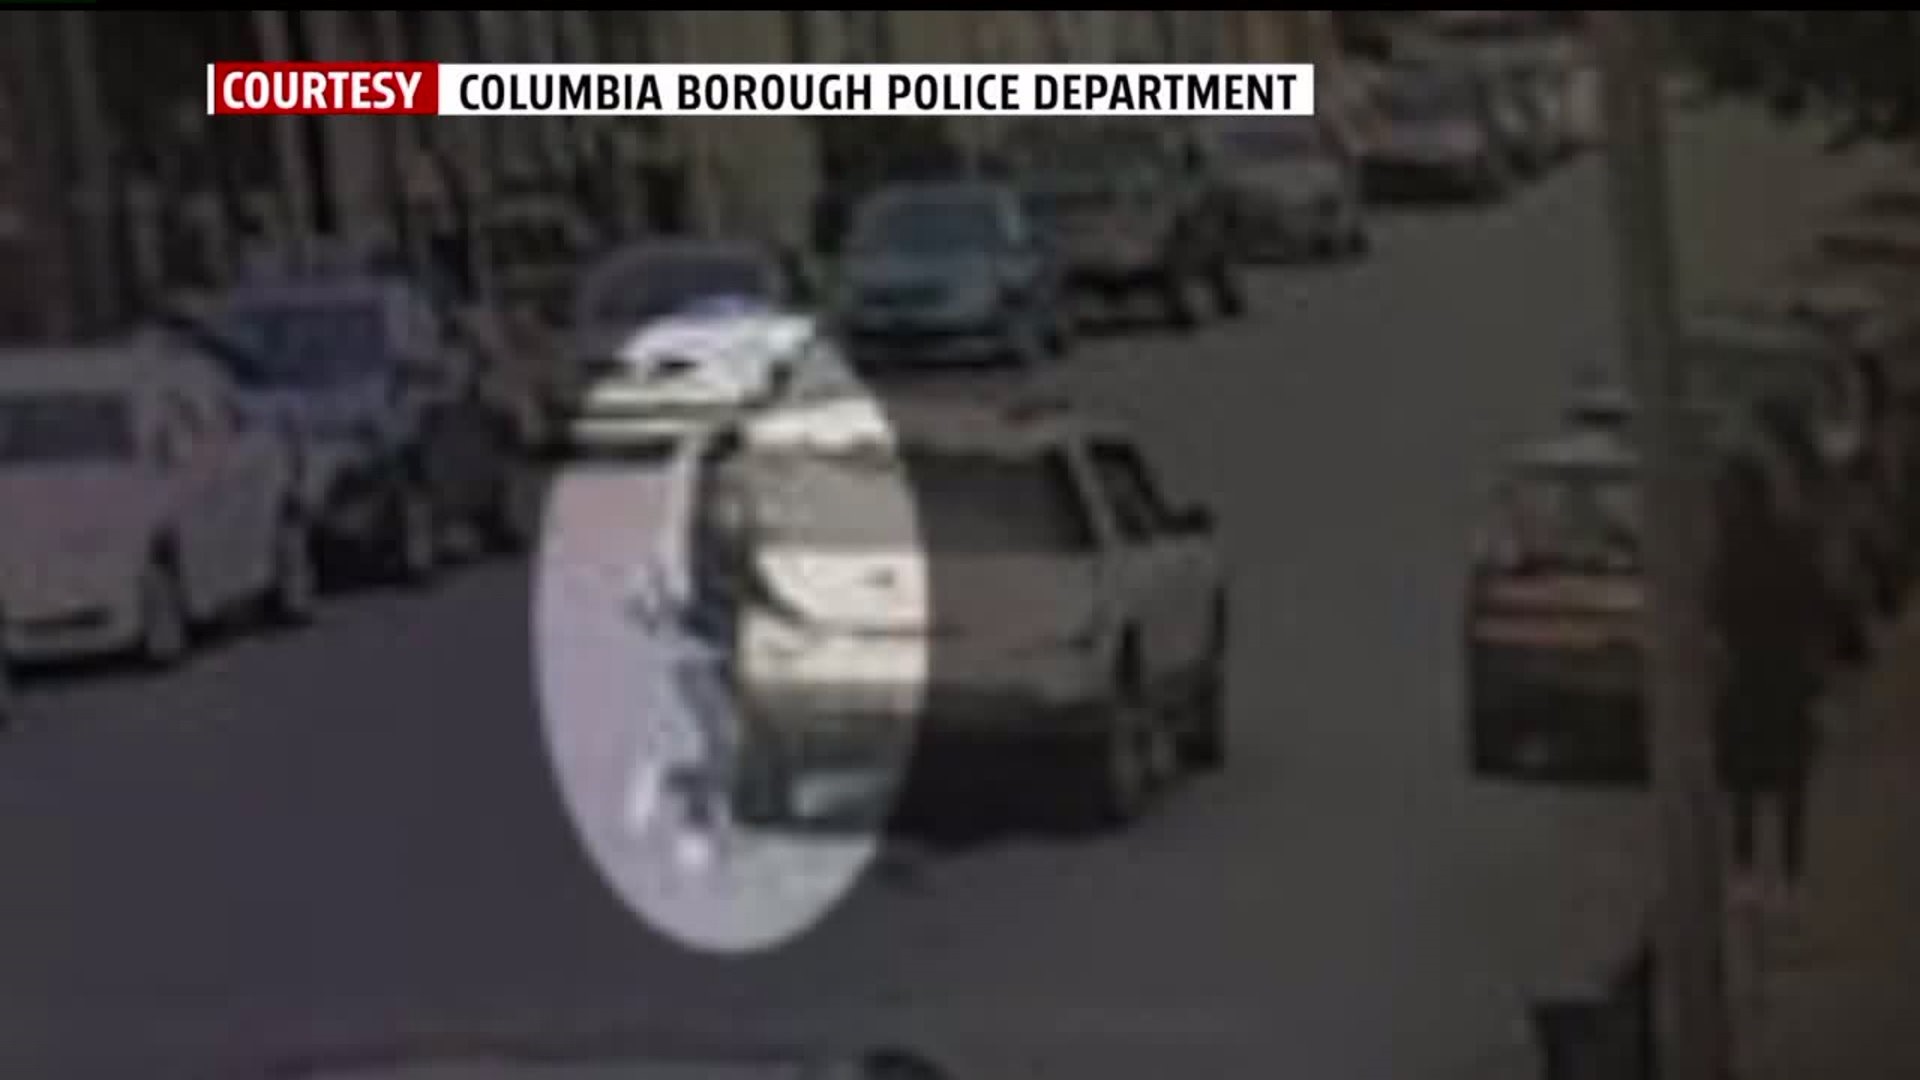 Police investigating shots fired incident in Columbia